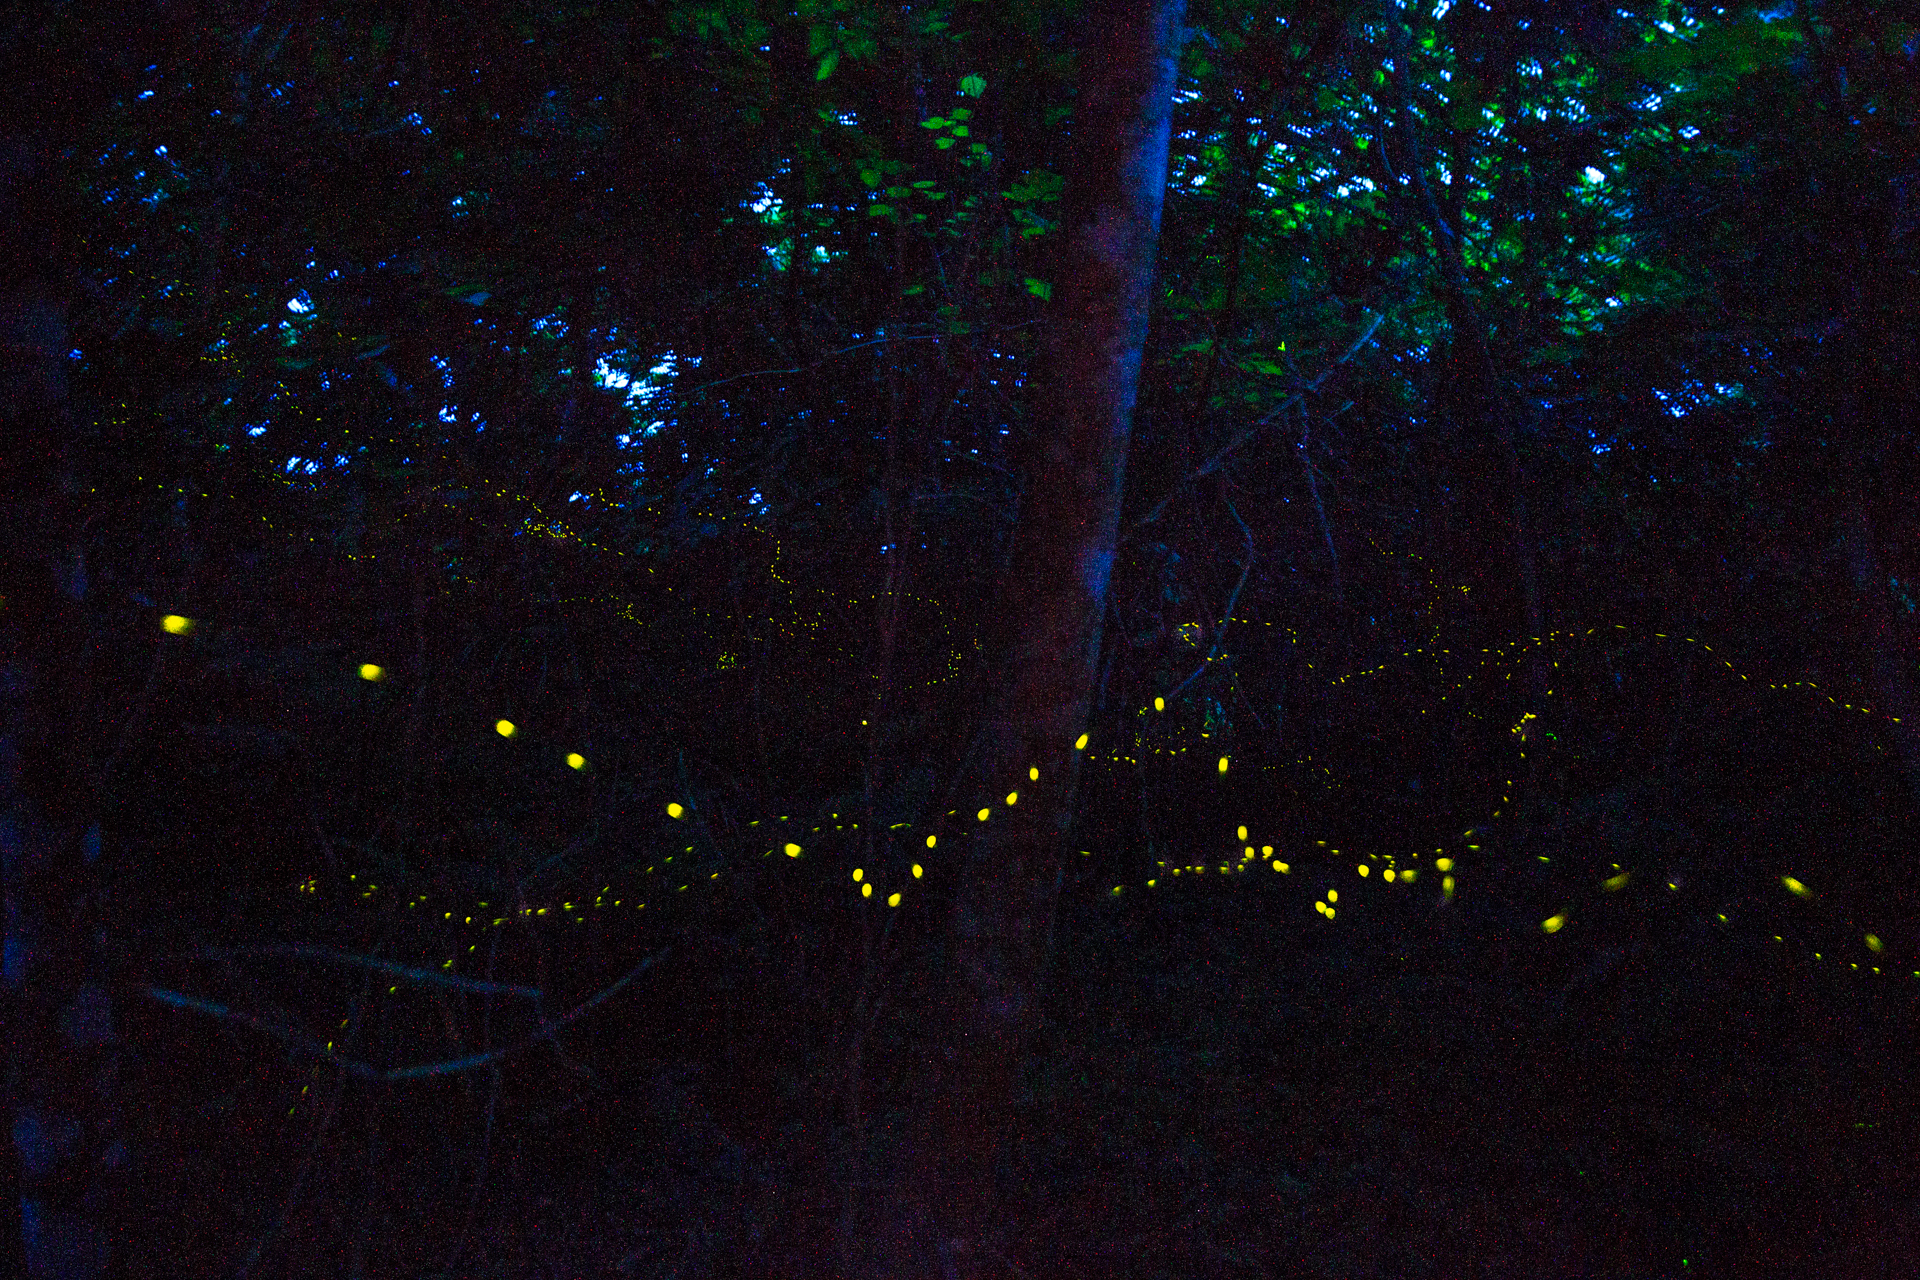 watch-the-forest-fireflies-of-ishigaki-declare-their-summer-love-09